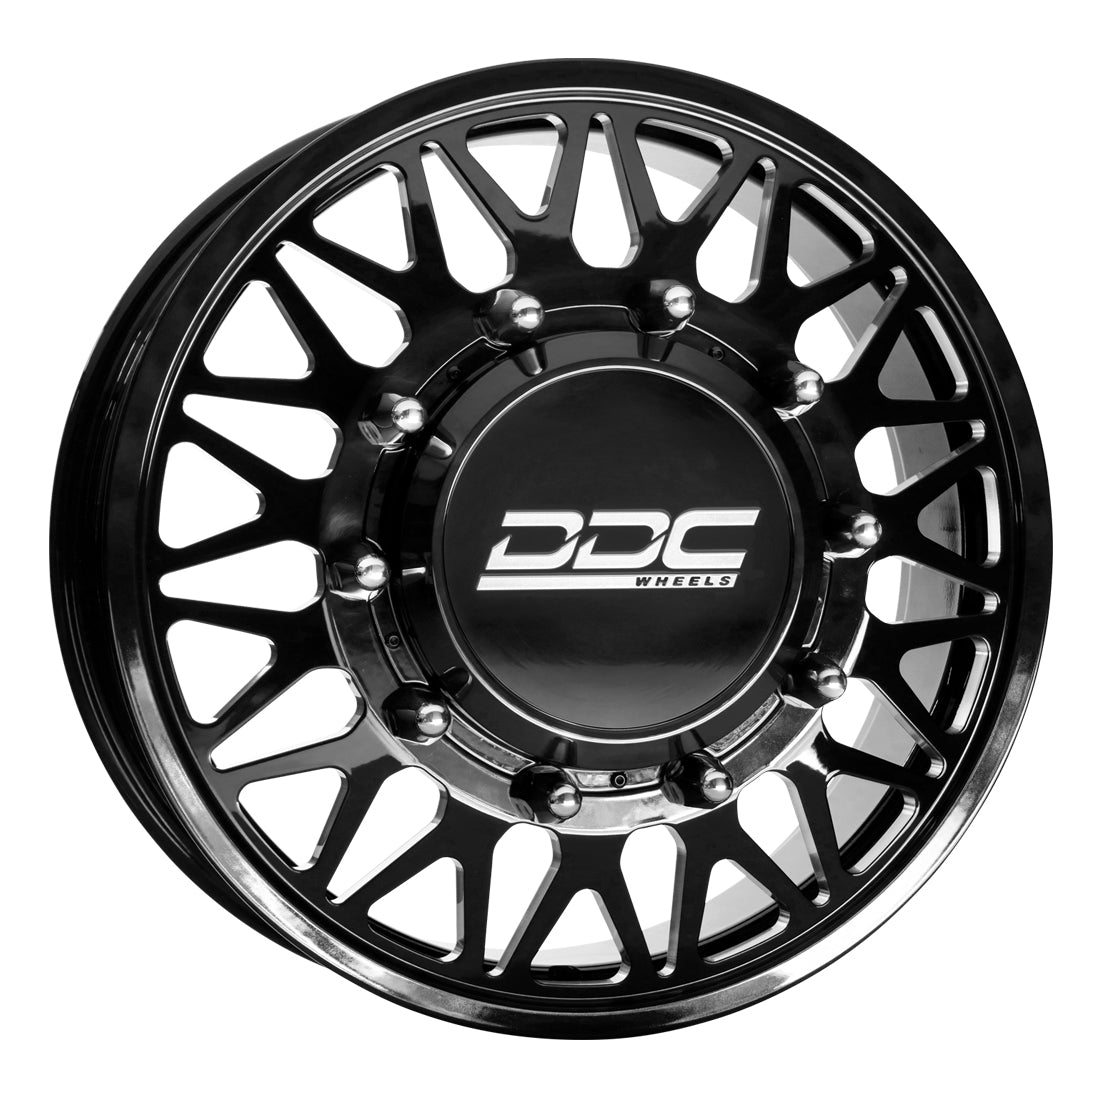 The Mesh Black Milled Open Country R/T 295/50R22 (33.7 x 12.2)